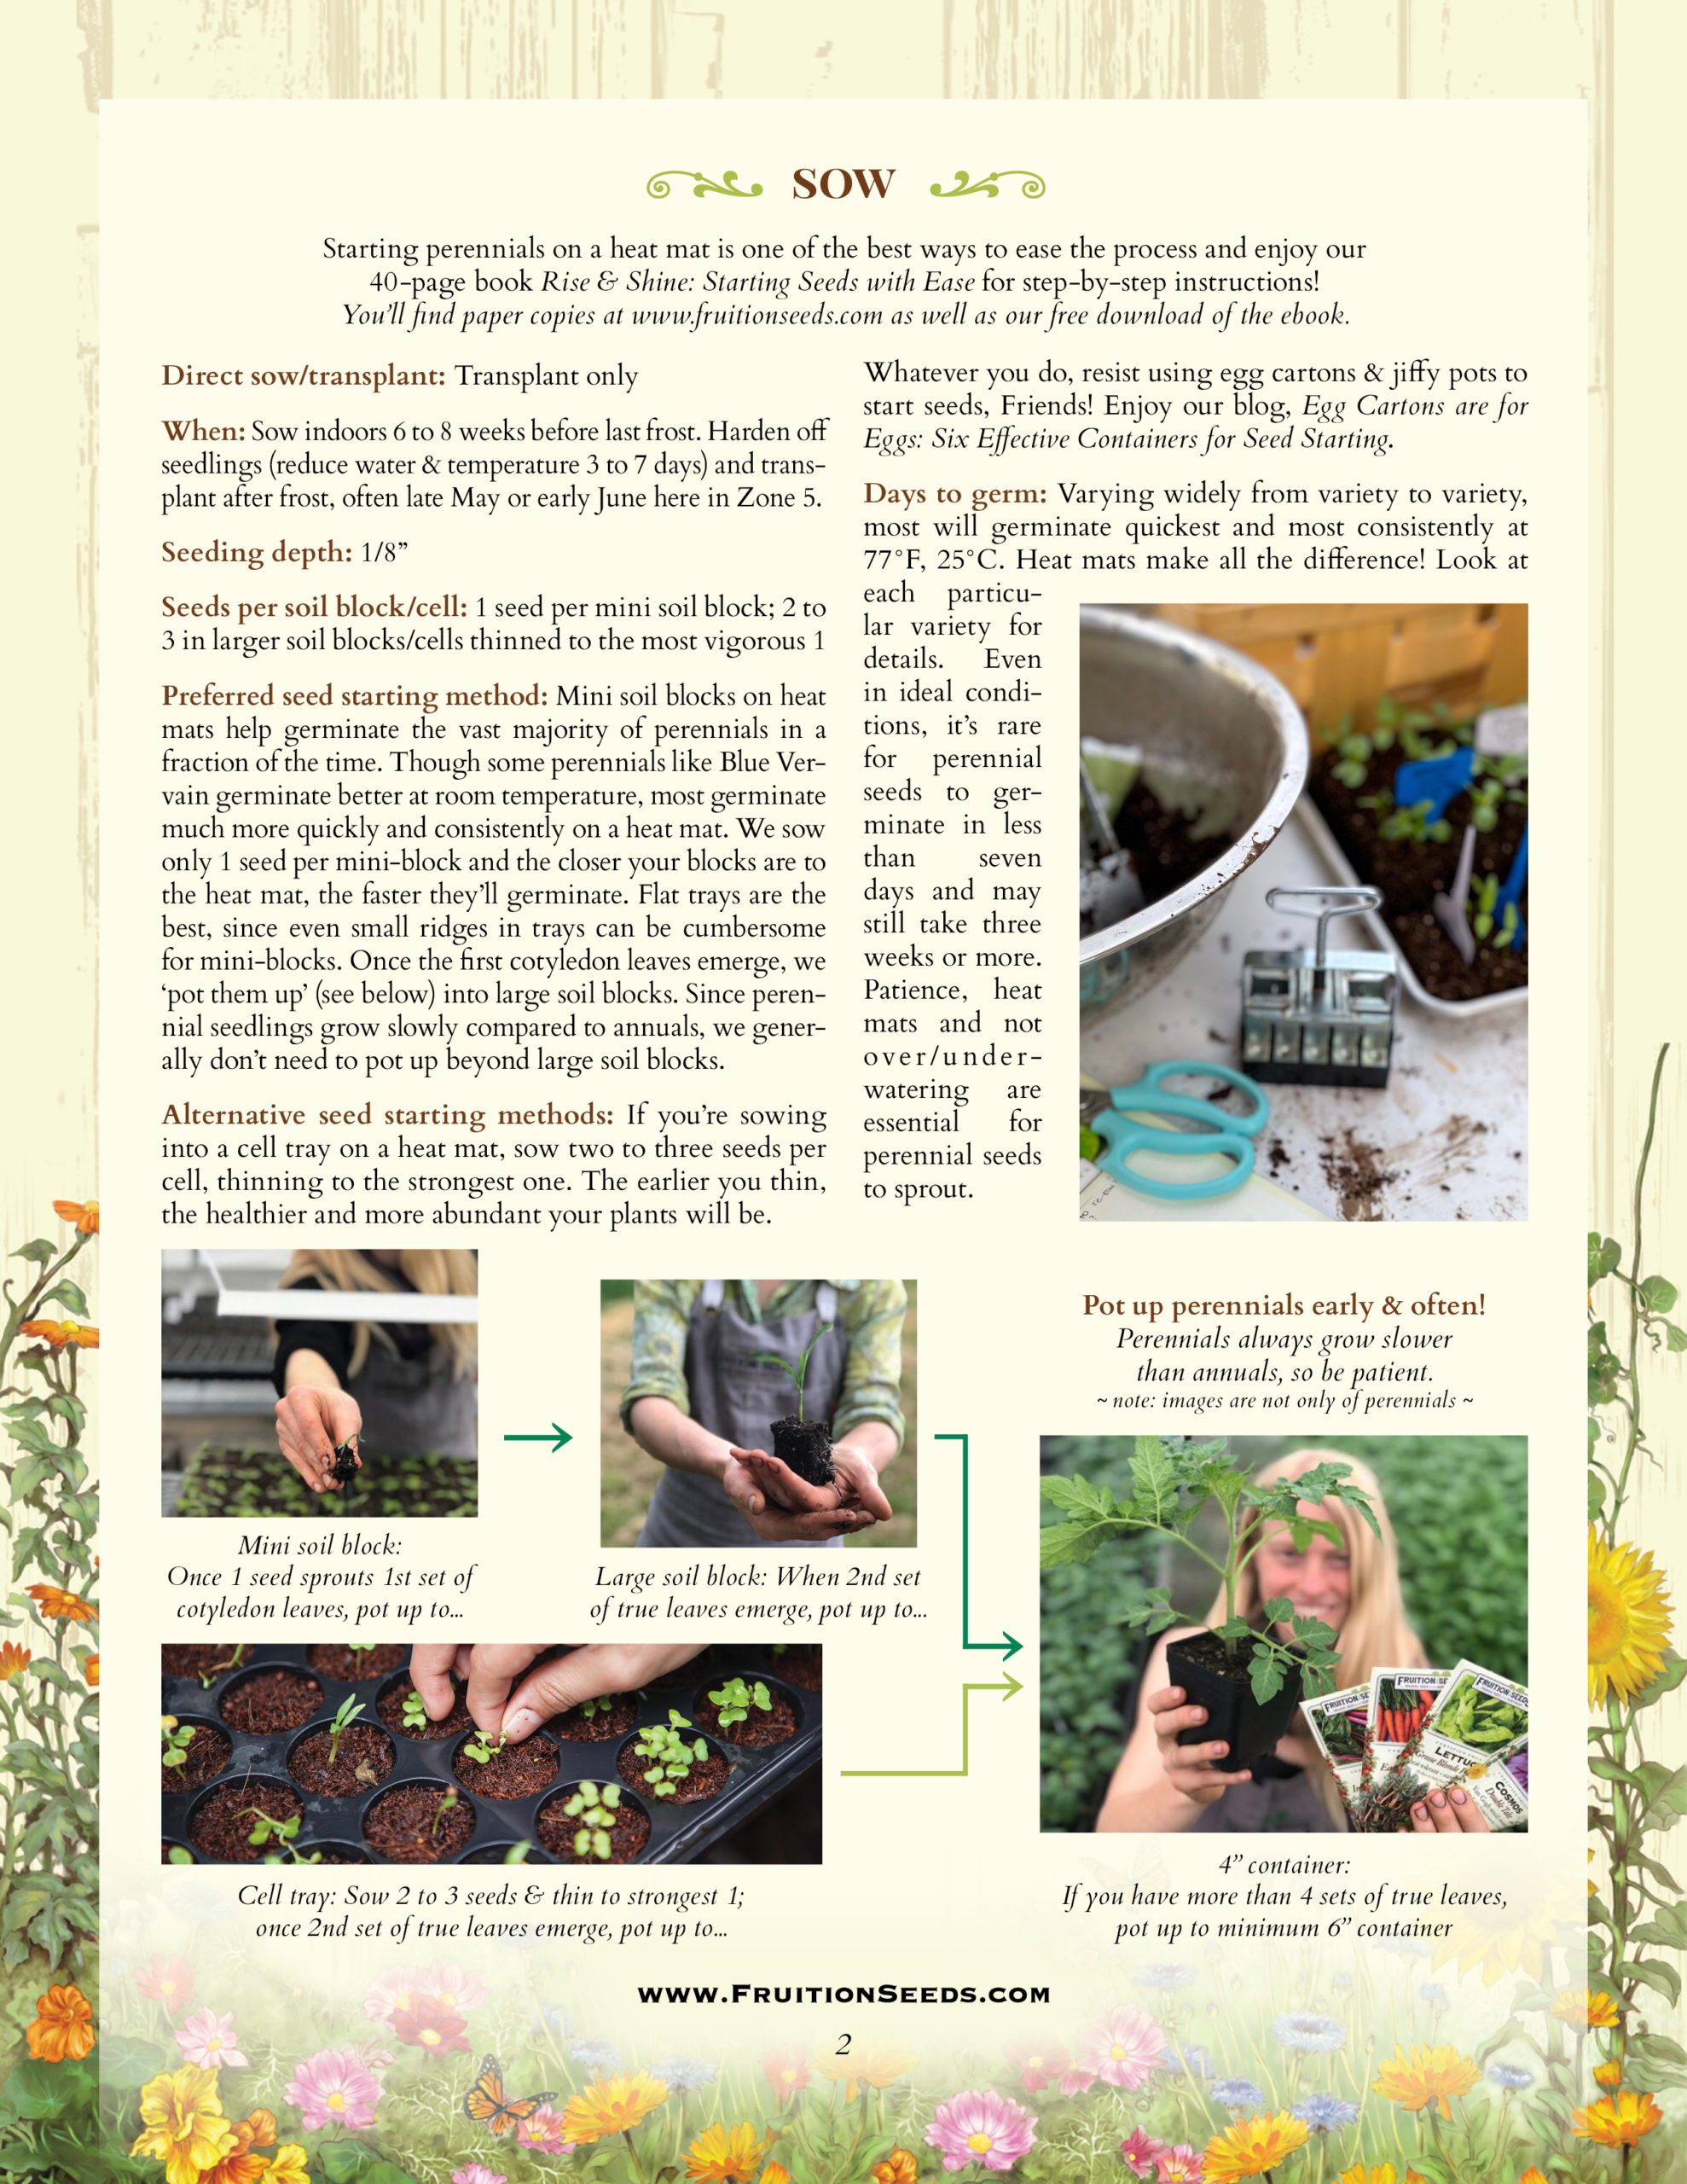 Thumbnail of Growing Guide for Sowing & Growing Series: Perennials